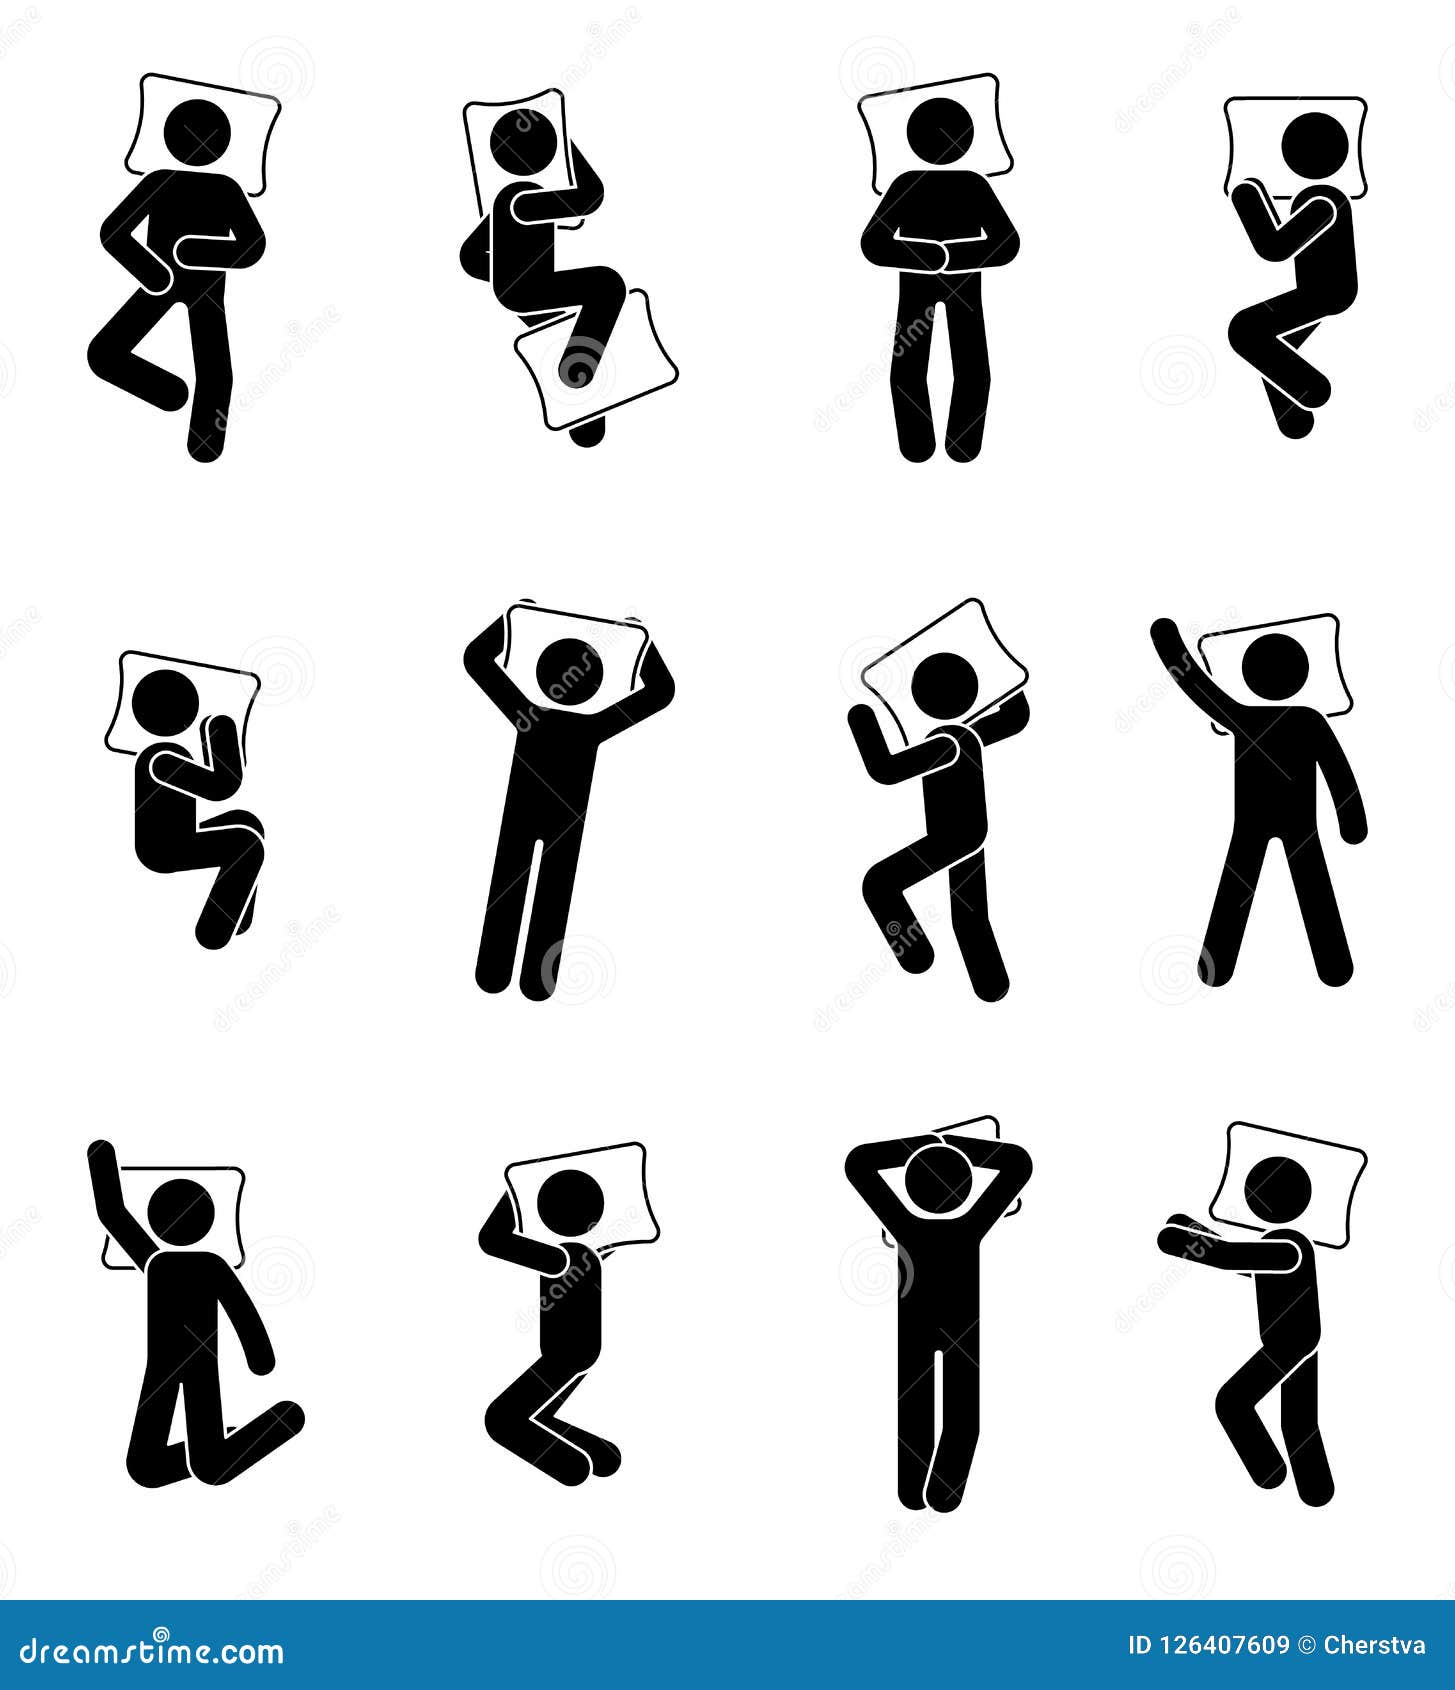 stick figure man sleeping icon set. deferent positions single male in bed pictogram.